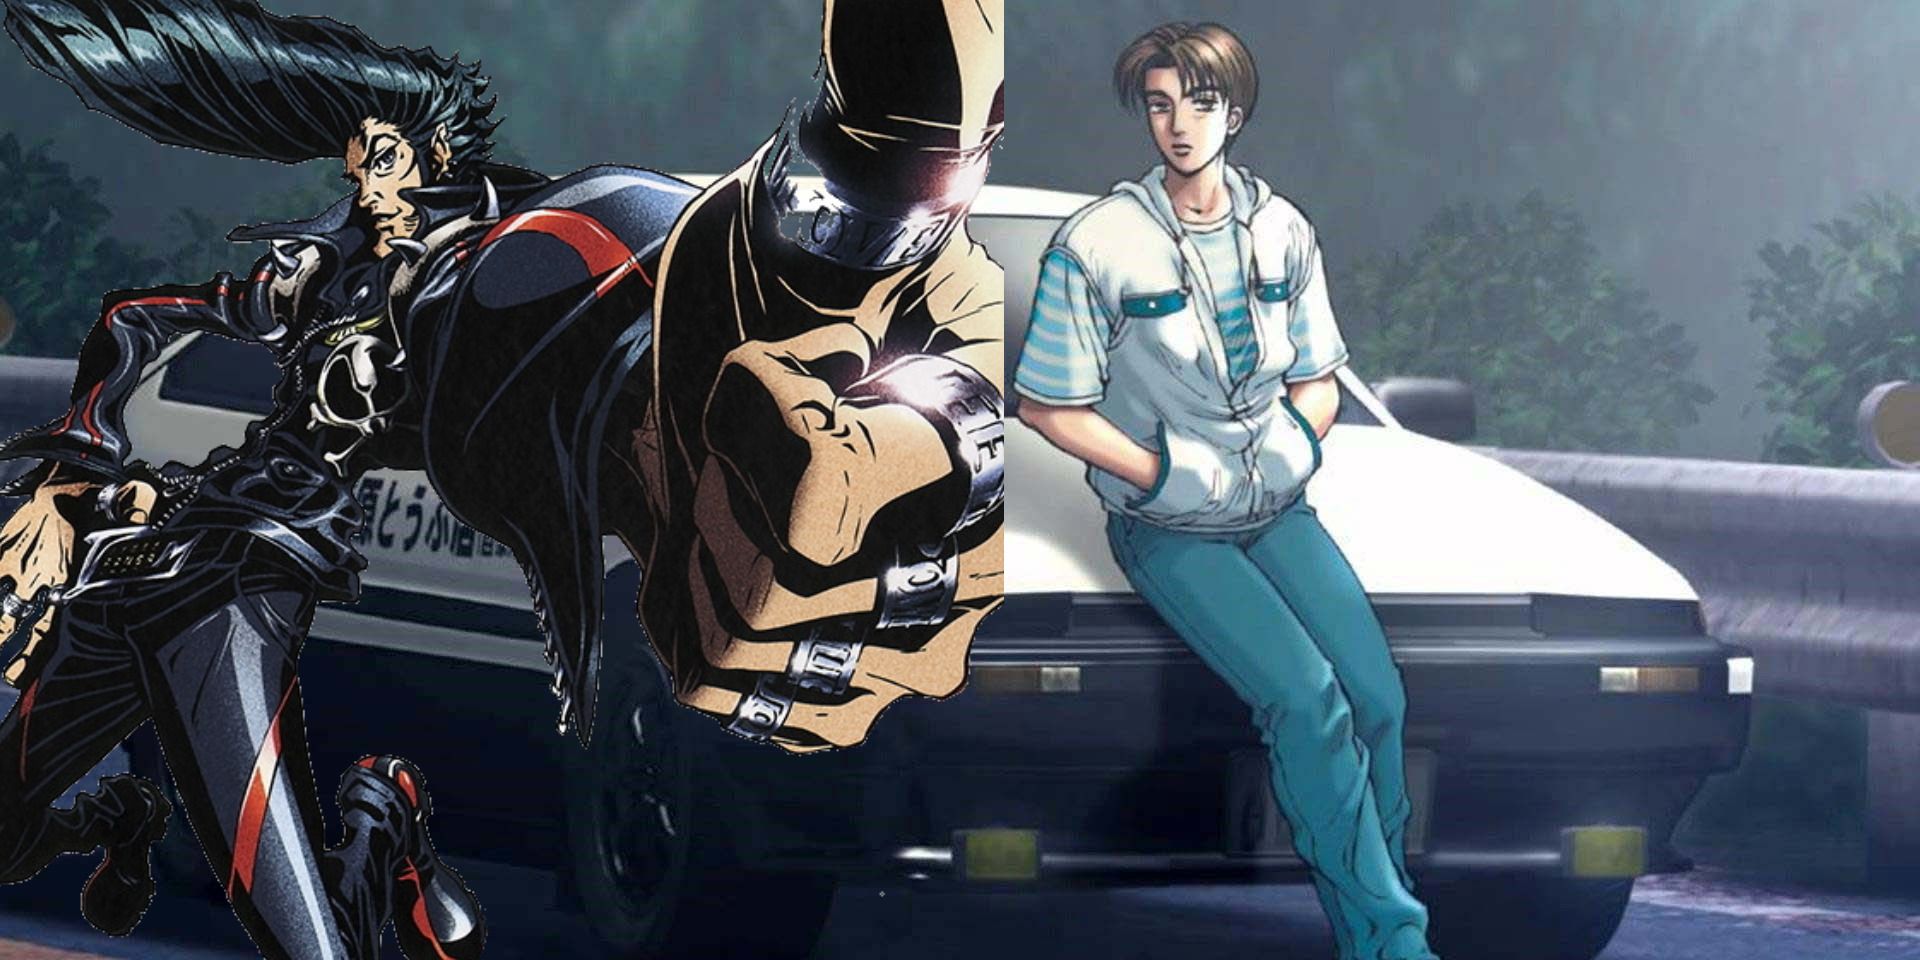 The racing genre in anime is (prolly) having a revival. We're getting  Initial D's sequel, MF Ghost. An OG script street racing anime called Hi  Driver. (Which seems like a mixture of